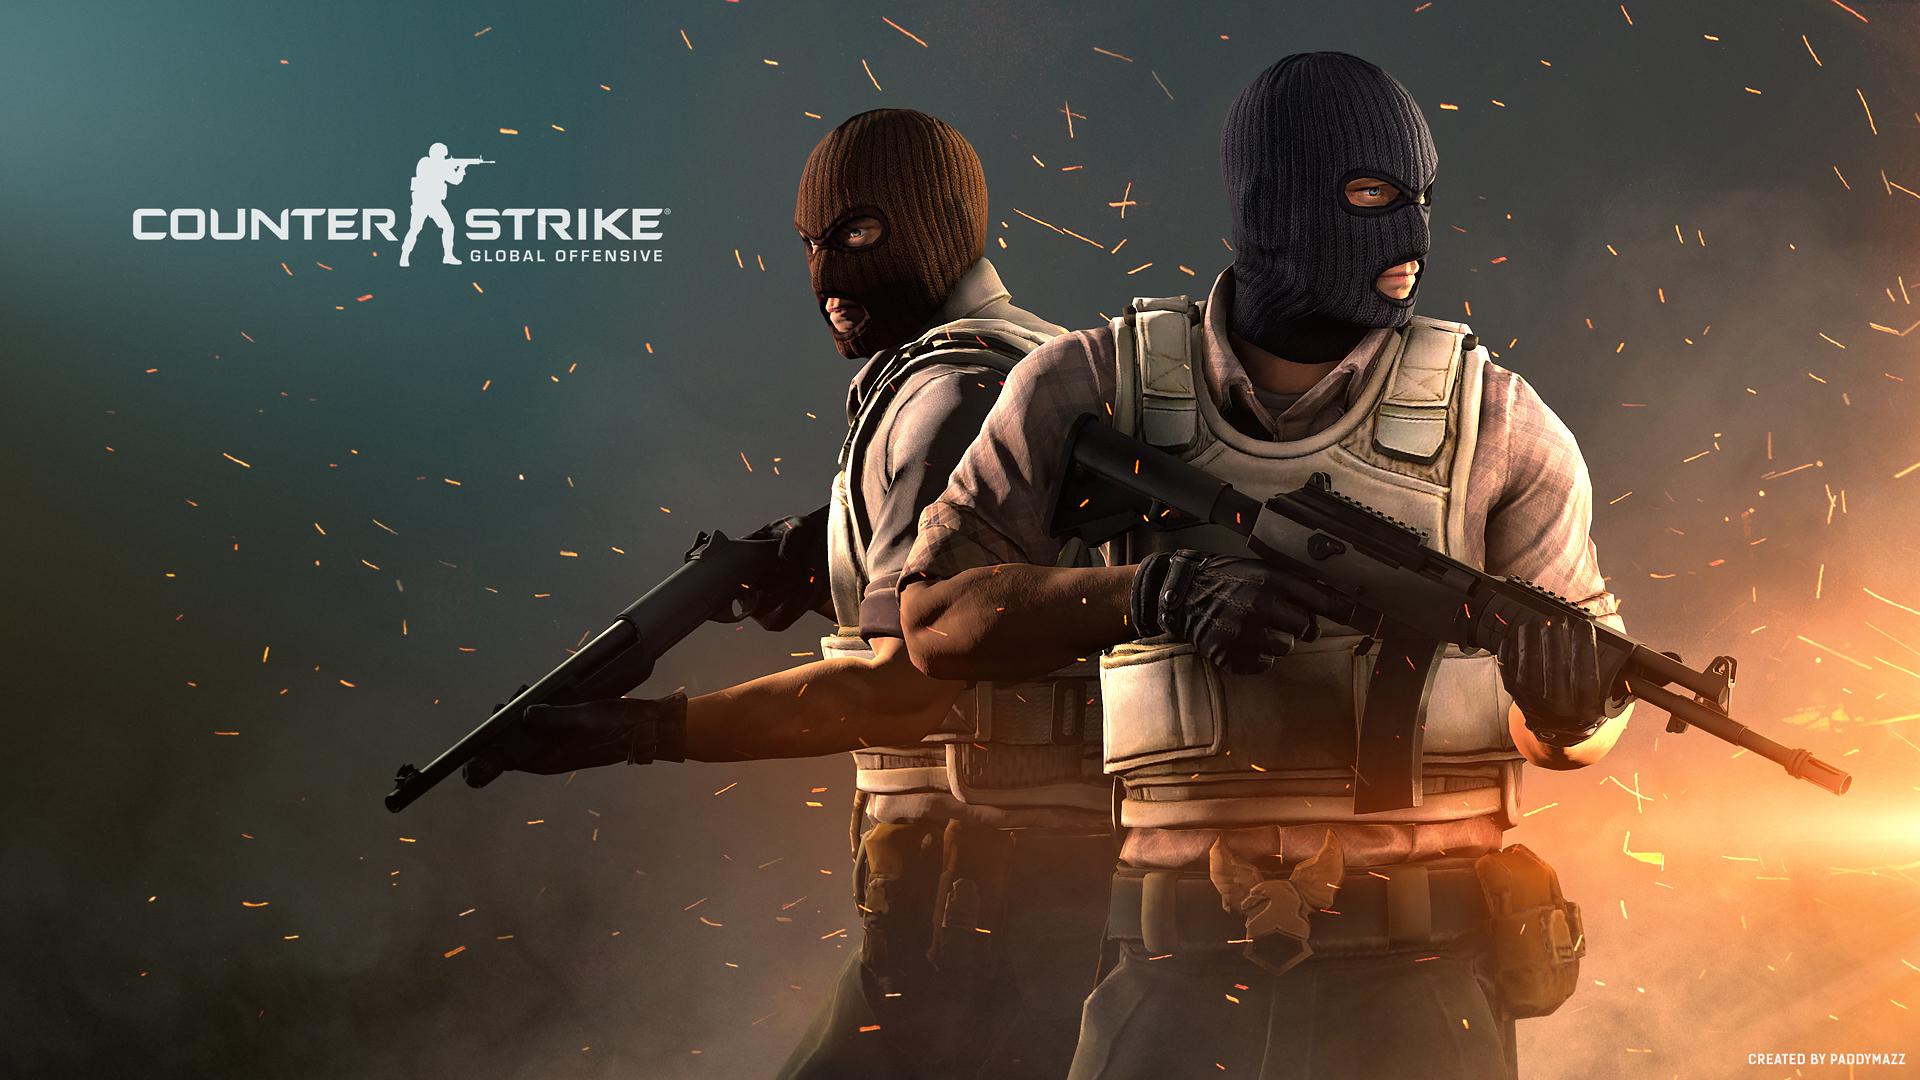 Counter-Strike: Global Offensive PC Download Free Full Game For windows